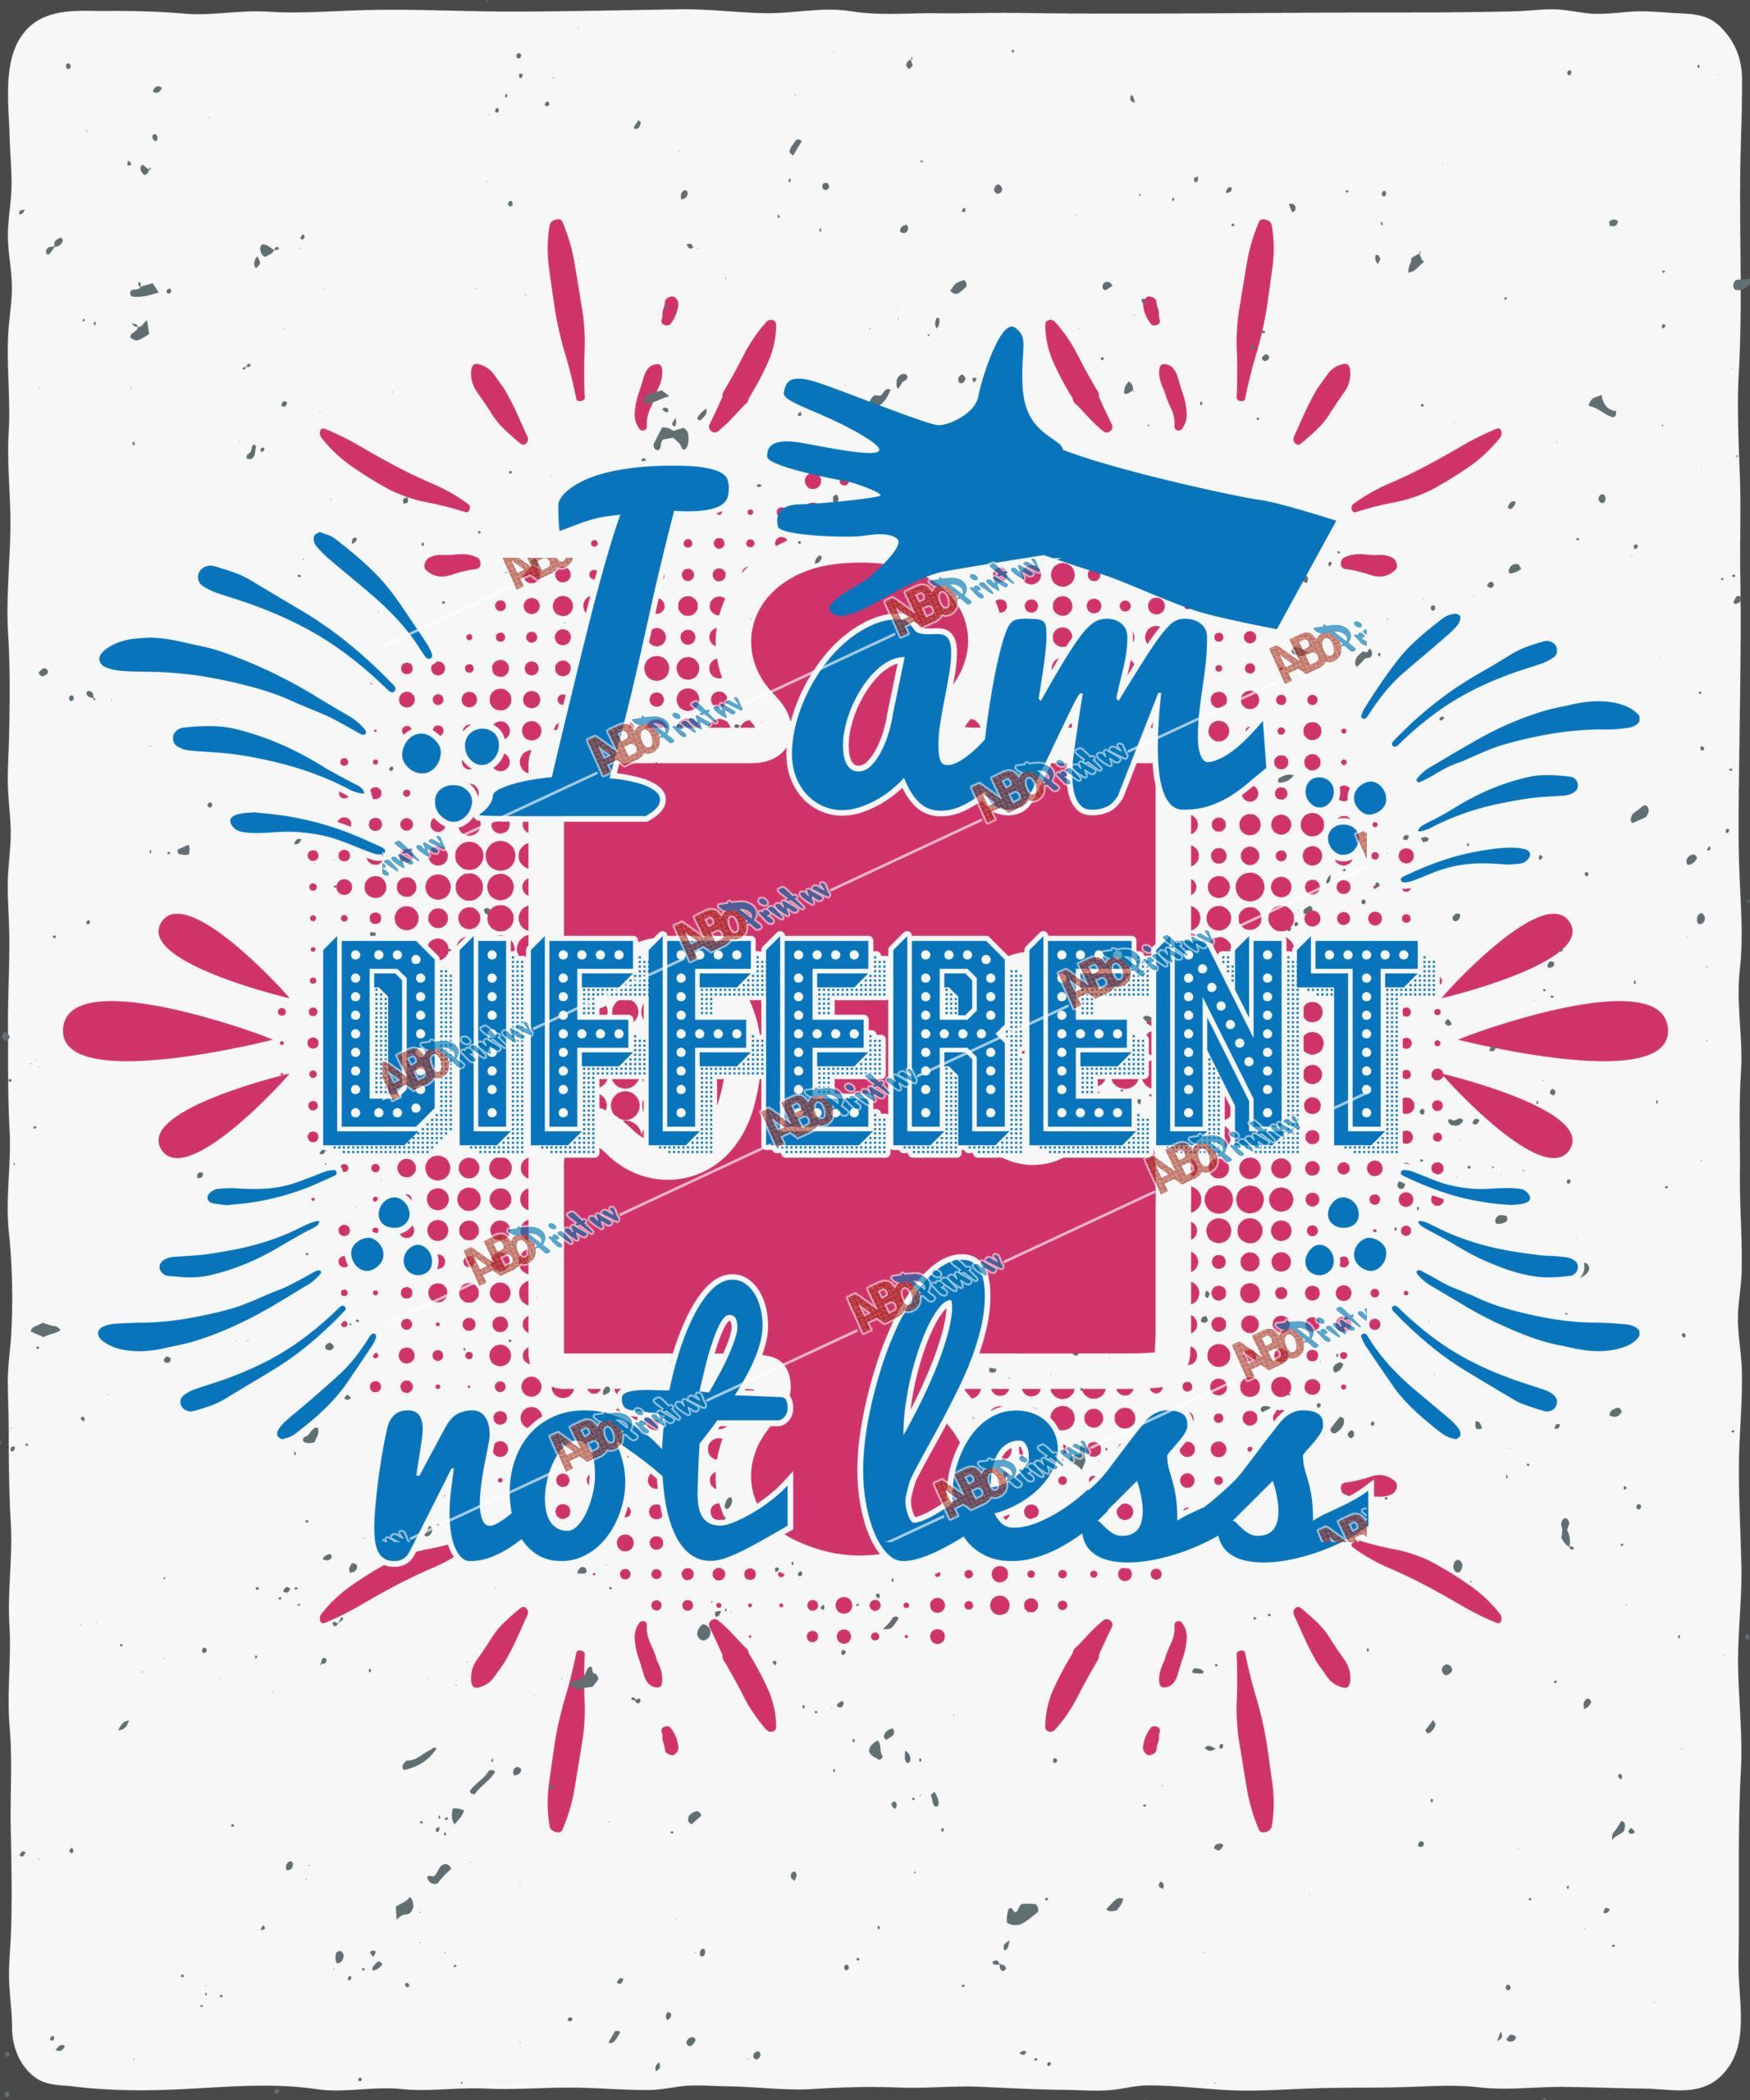 I am different, not less